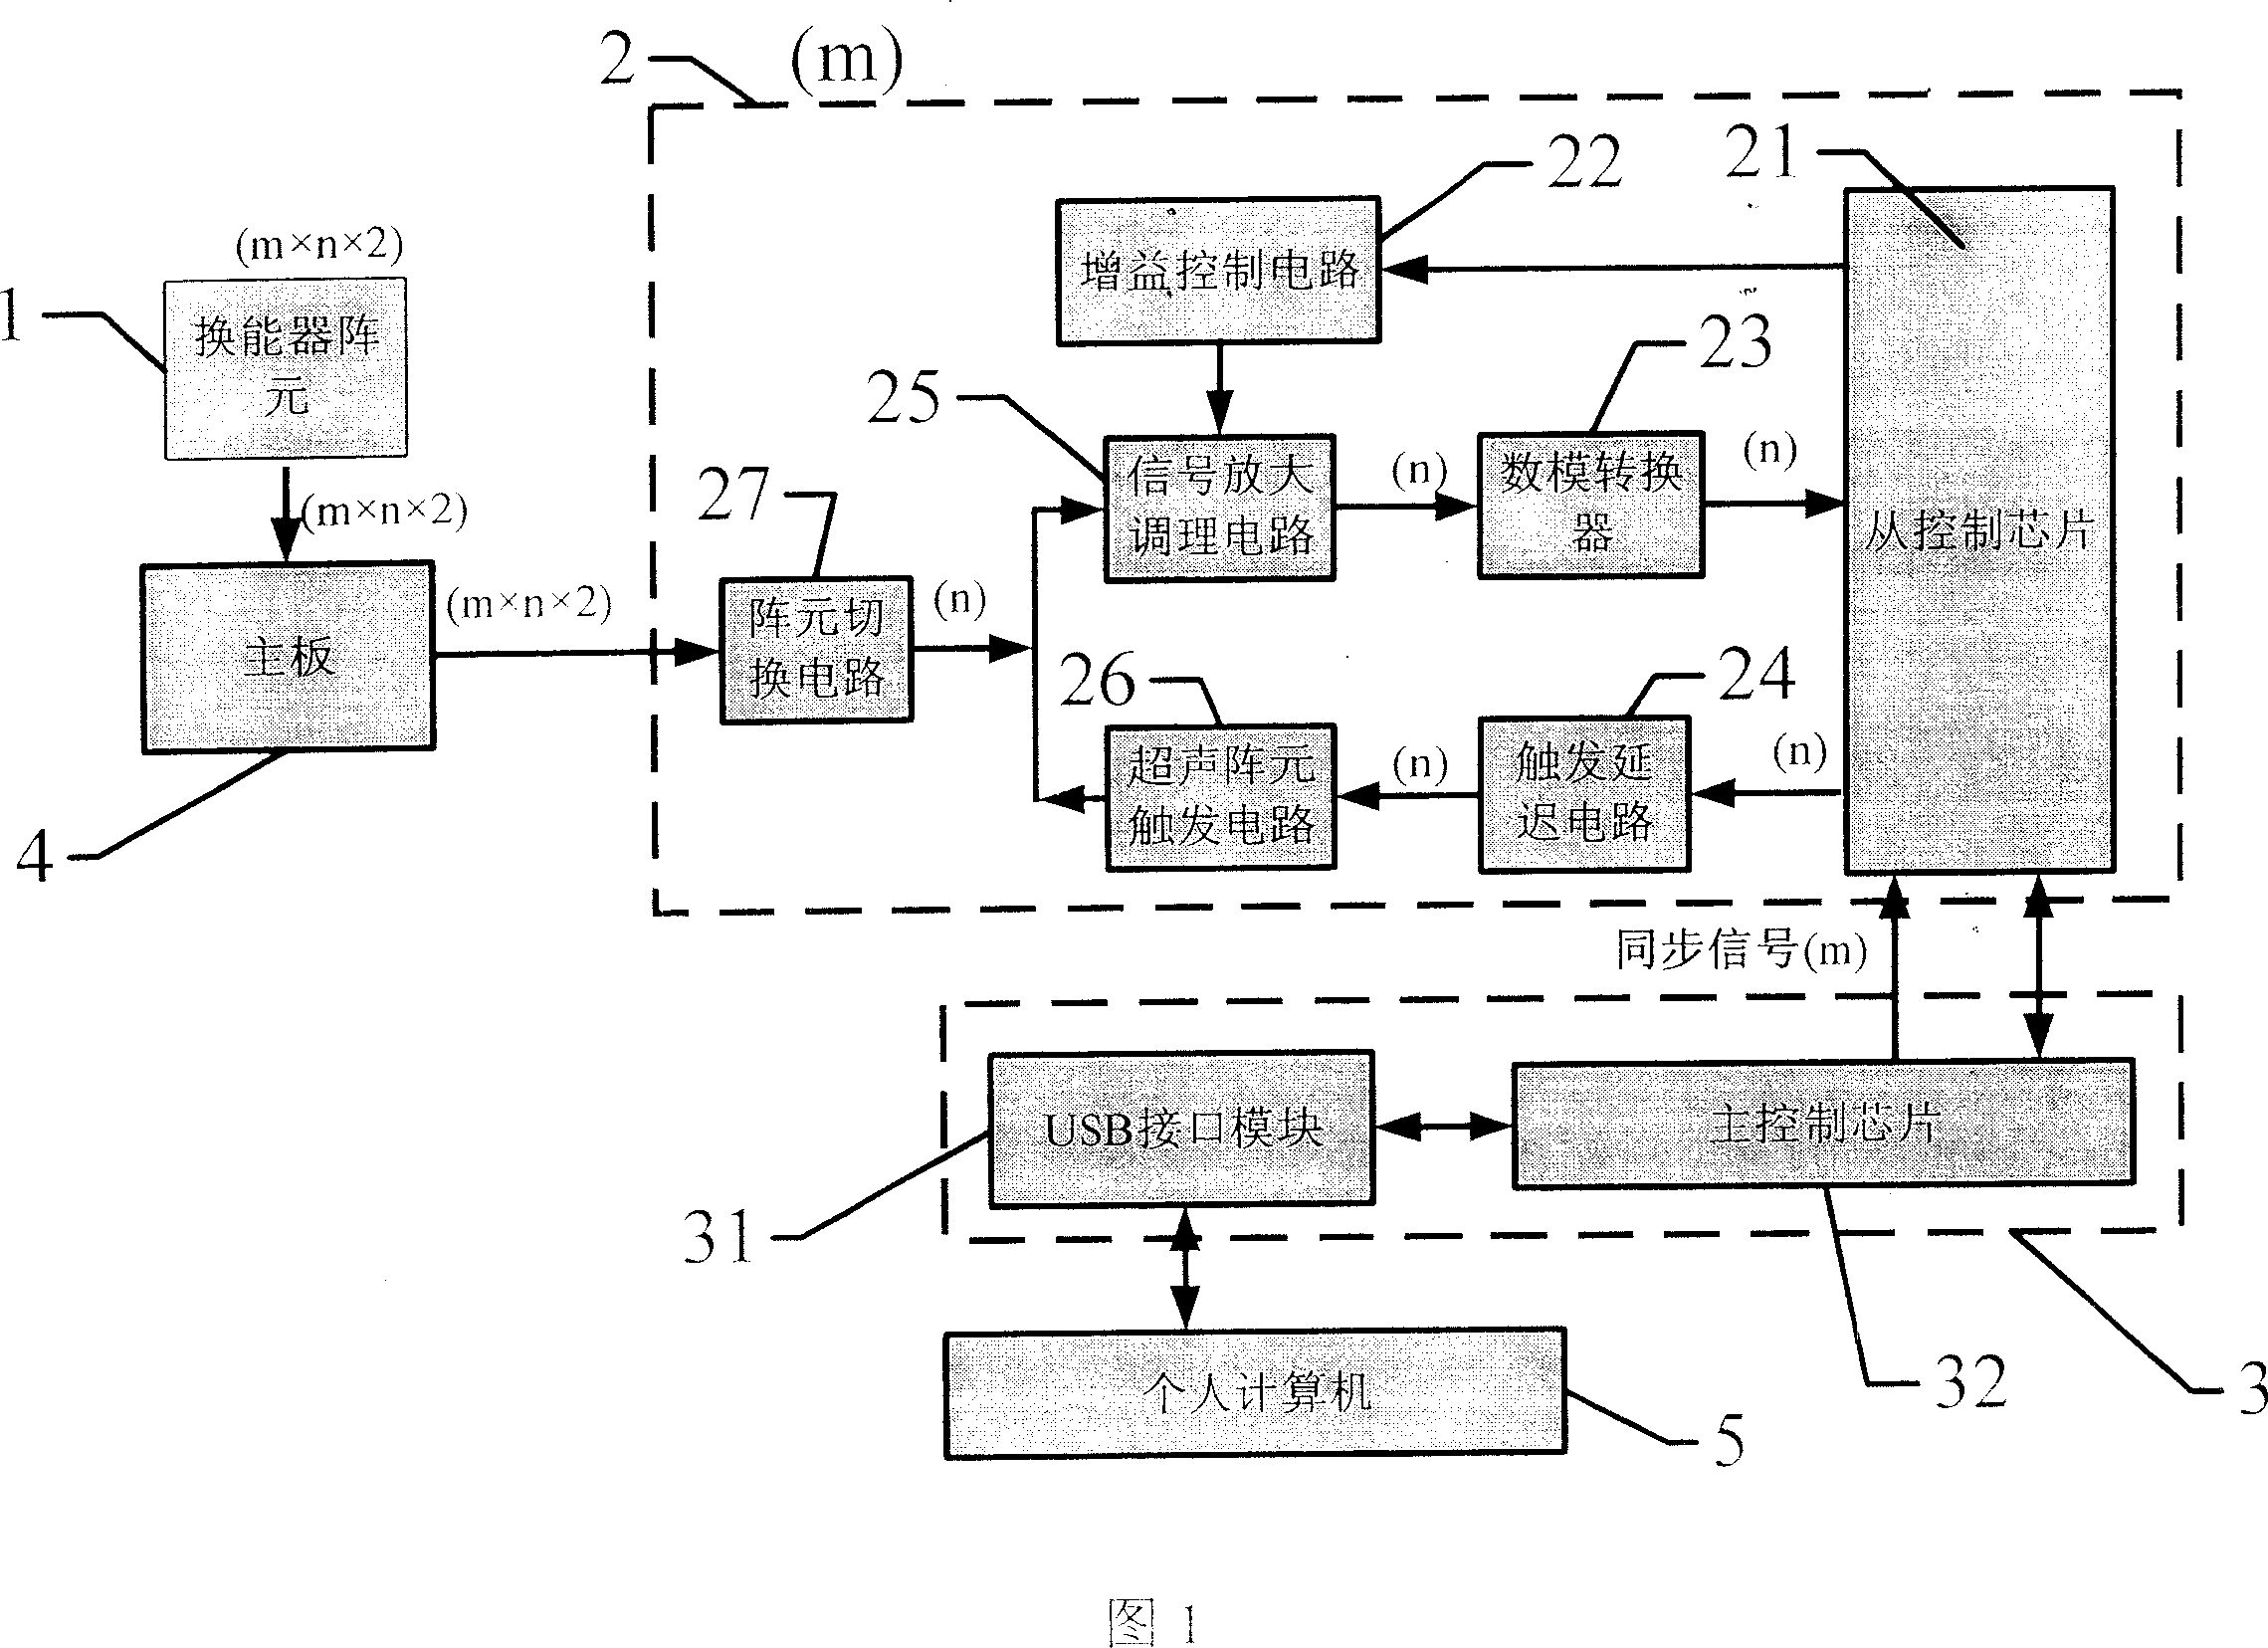 Ultrasonic phased array inspection instrument